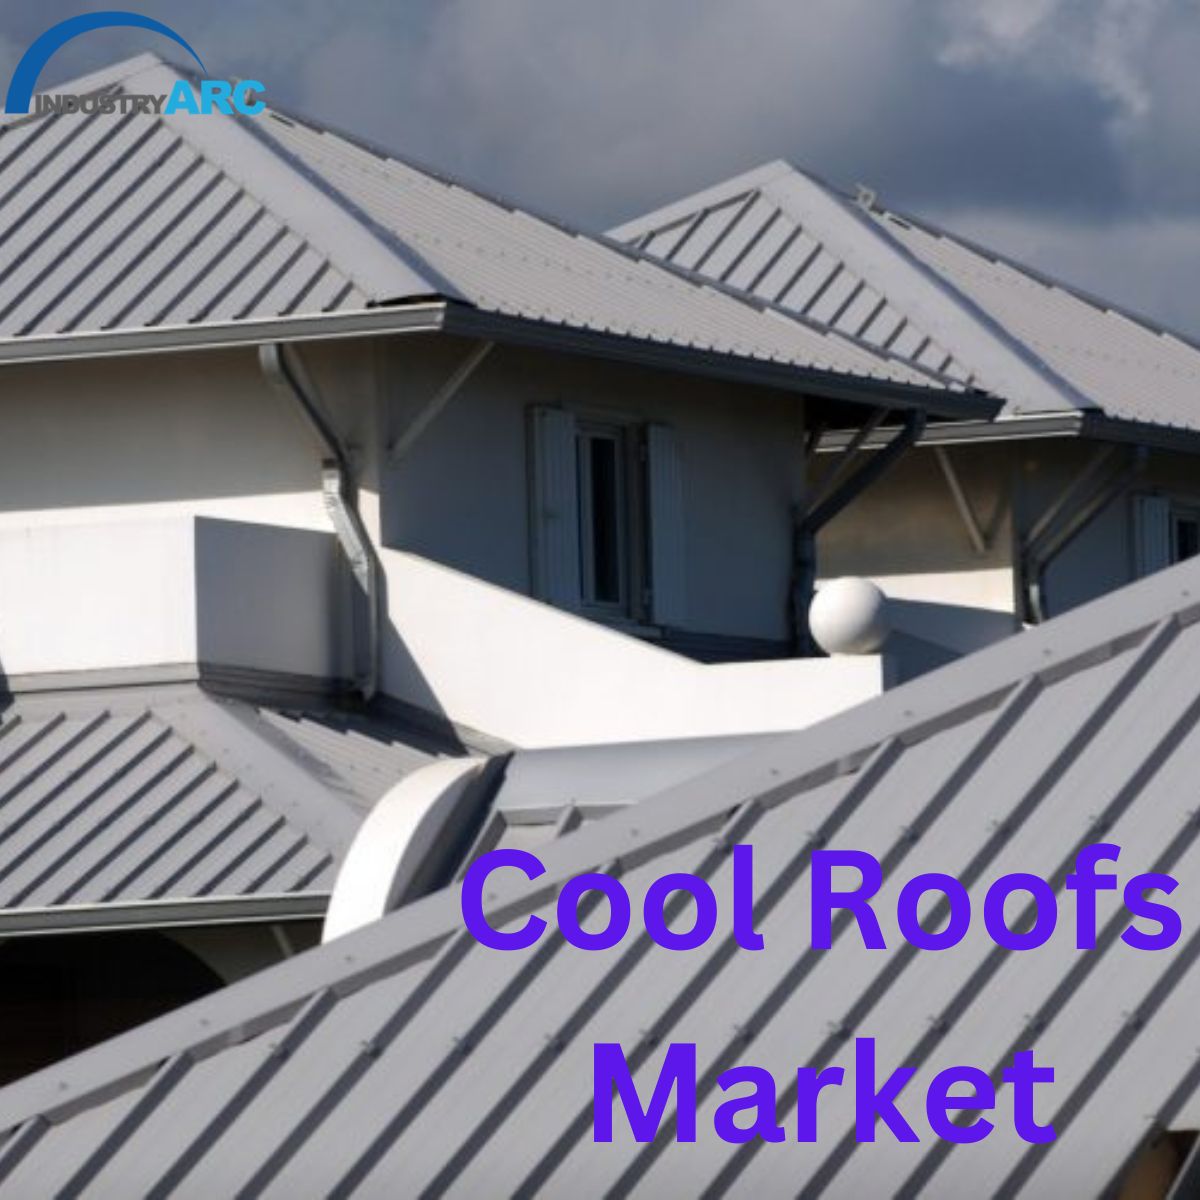 #Coolroofs #Roofs  #buildings #Construction #FUEL  

𝐆𝐞𝐭 𝐌𝐨𝐫𝐞 𝐈𝐧𝐟𝐨 @ tinyurl.com/w5tjhcts

𝐌𝐚𝐣𝐨𝐫 𝐤𝐞𝐲 𝐩𝐥𝐚𝐲𝐞𝐫𝐬 𝐢𝐧𝐜𝐥𝐮𝐝𝐞 : @BASF | @Evonik |